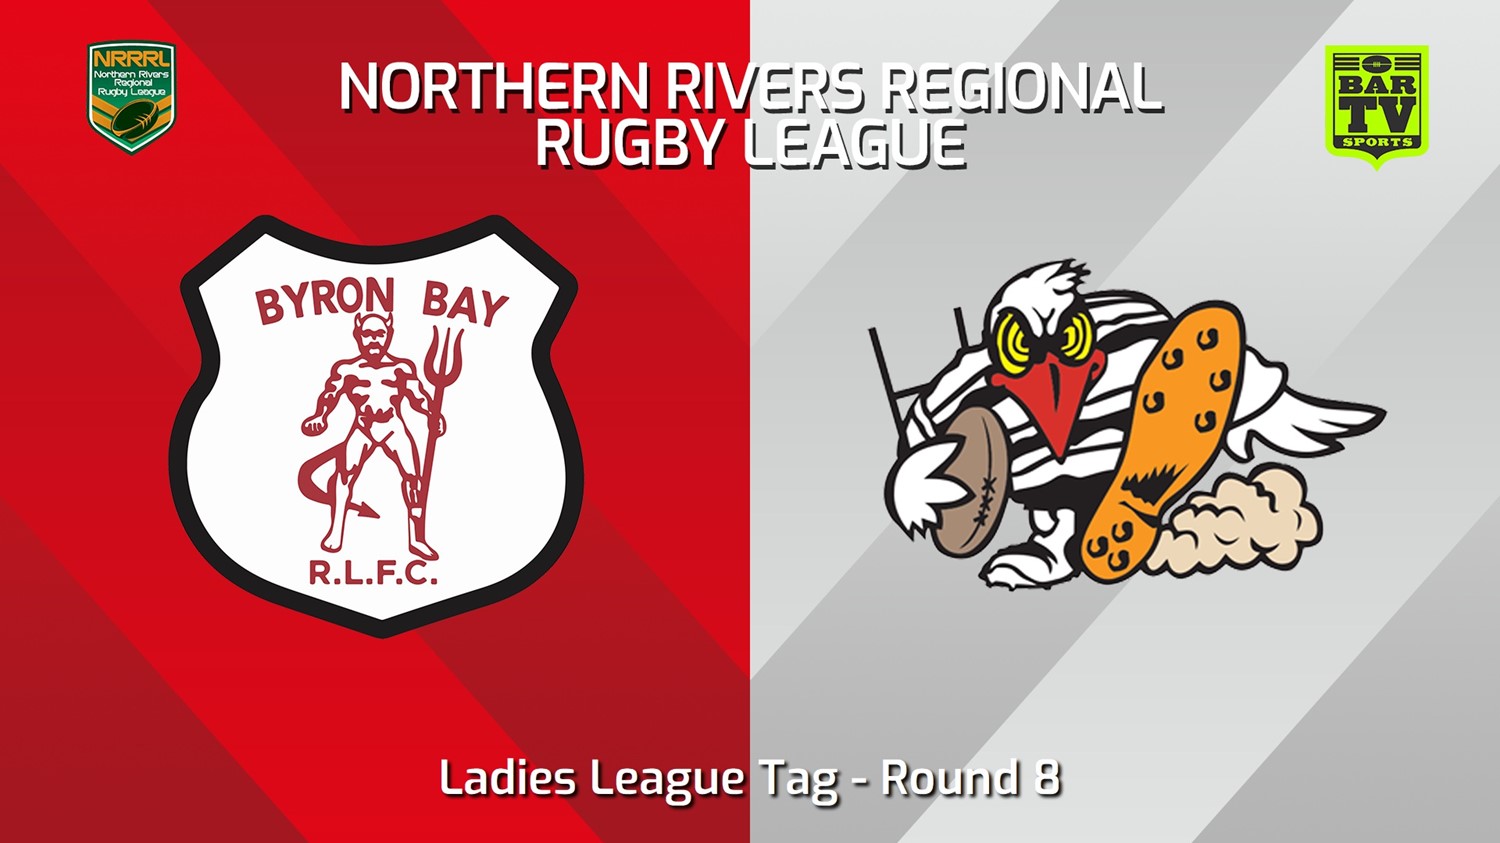 240526-video-Northern Rivers Round 8 - Ladies League Tag - Byron Bay Red Devils v Tweed Heads Seagulls Slate Image